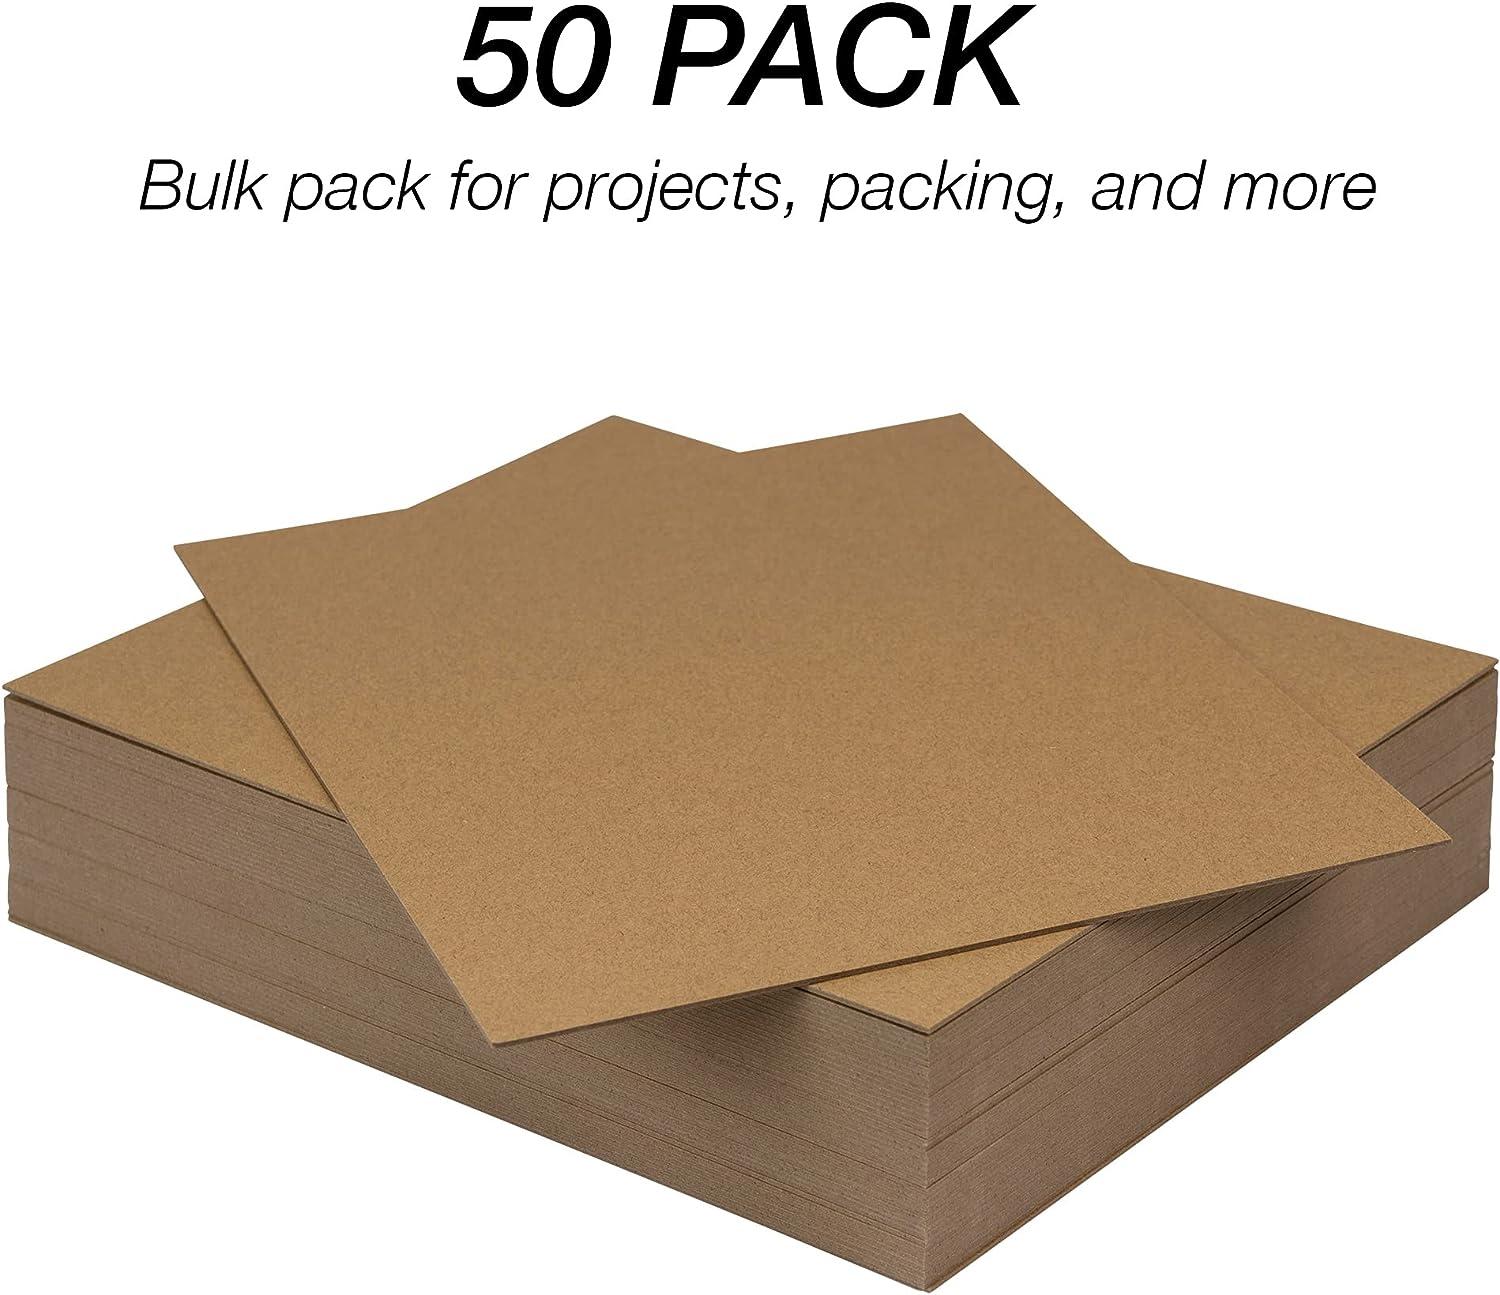 Samsill Chipboard Sheets 8.5 x 11 Inches, 50 Pack, Acid Free, 50